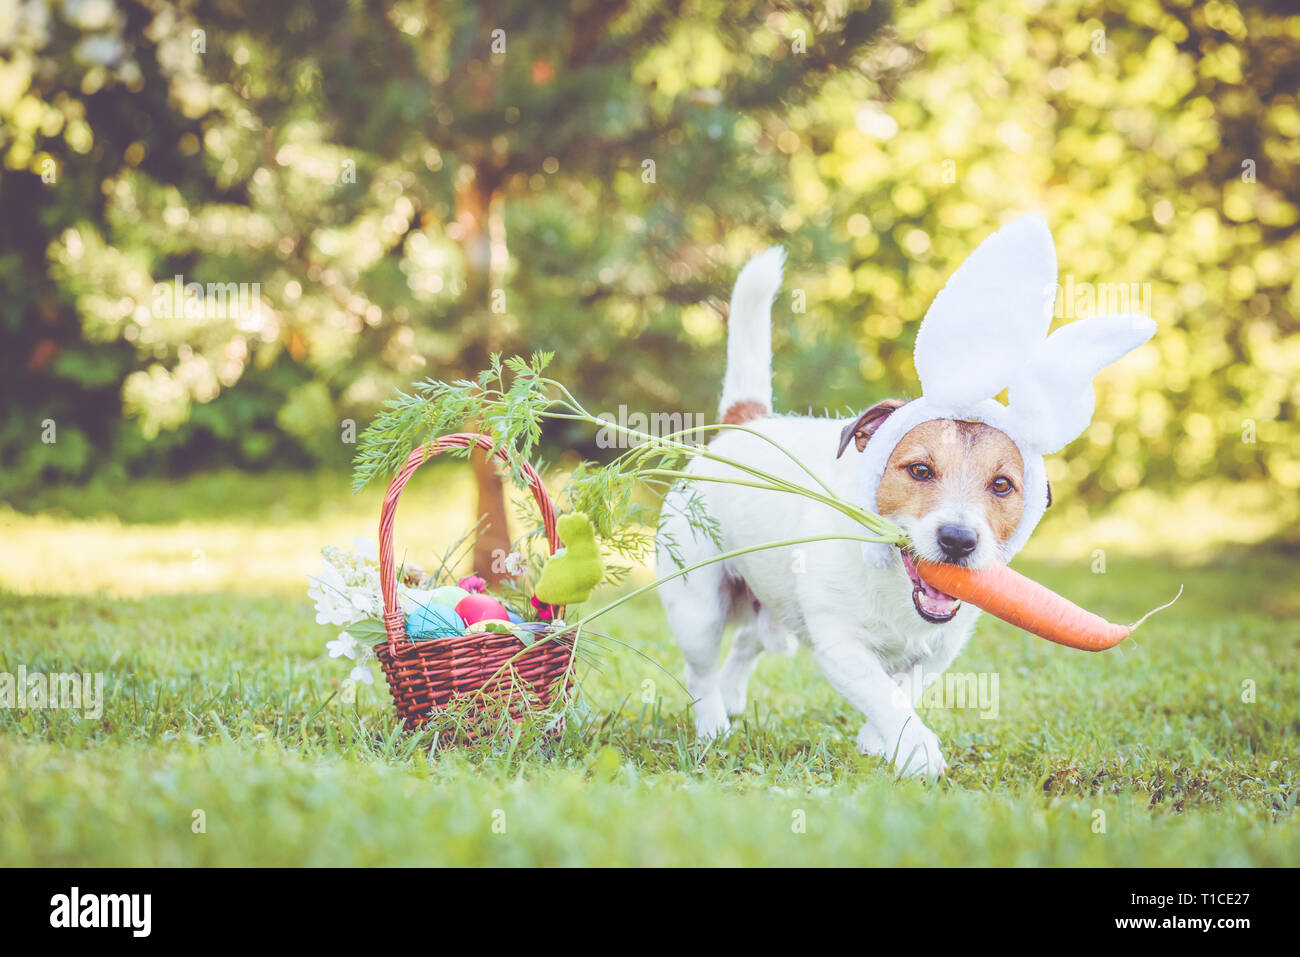 Happy dog wearing bunny ears for Easter party holding large carrot in mouth Stock Photo